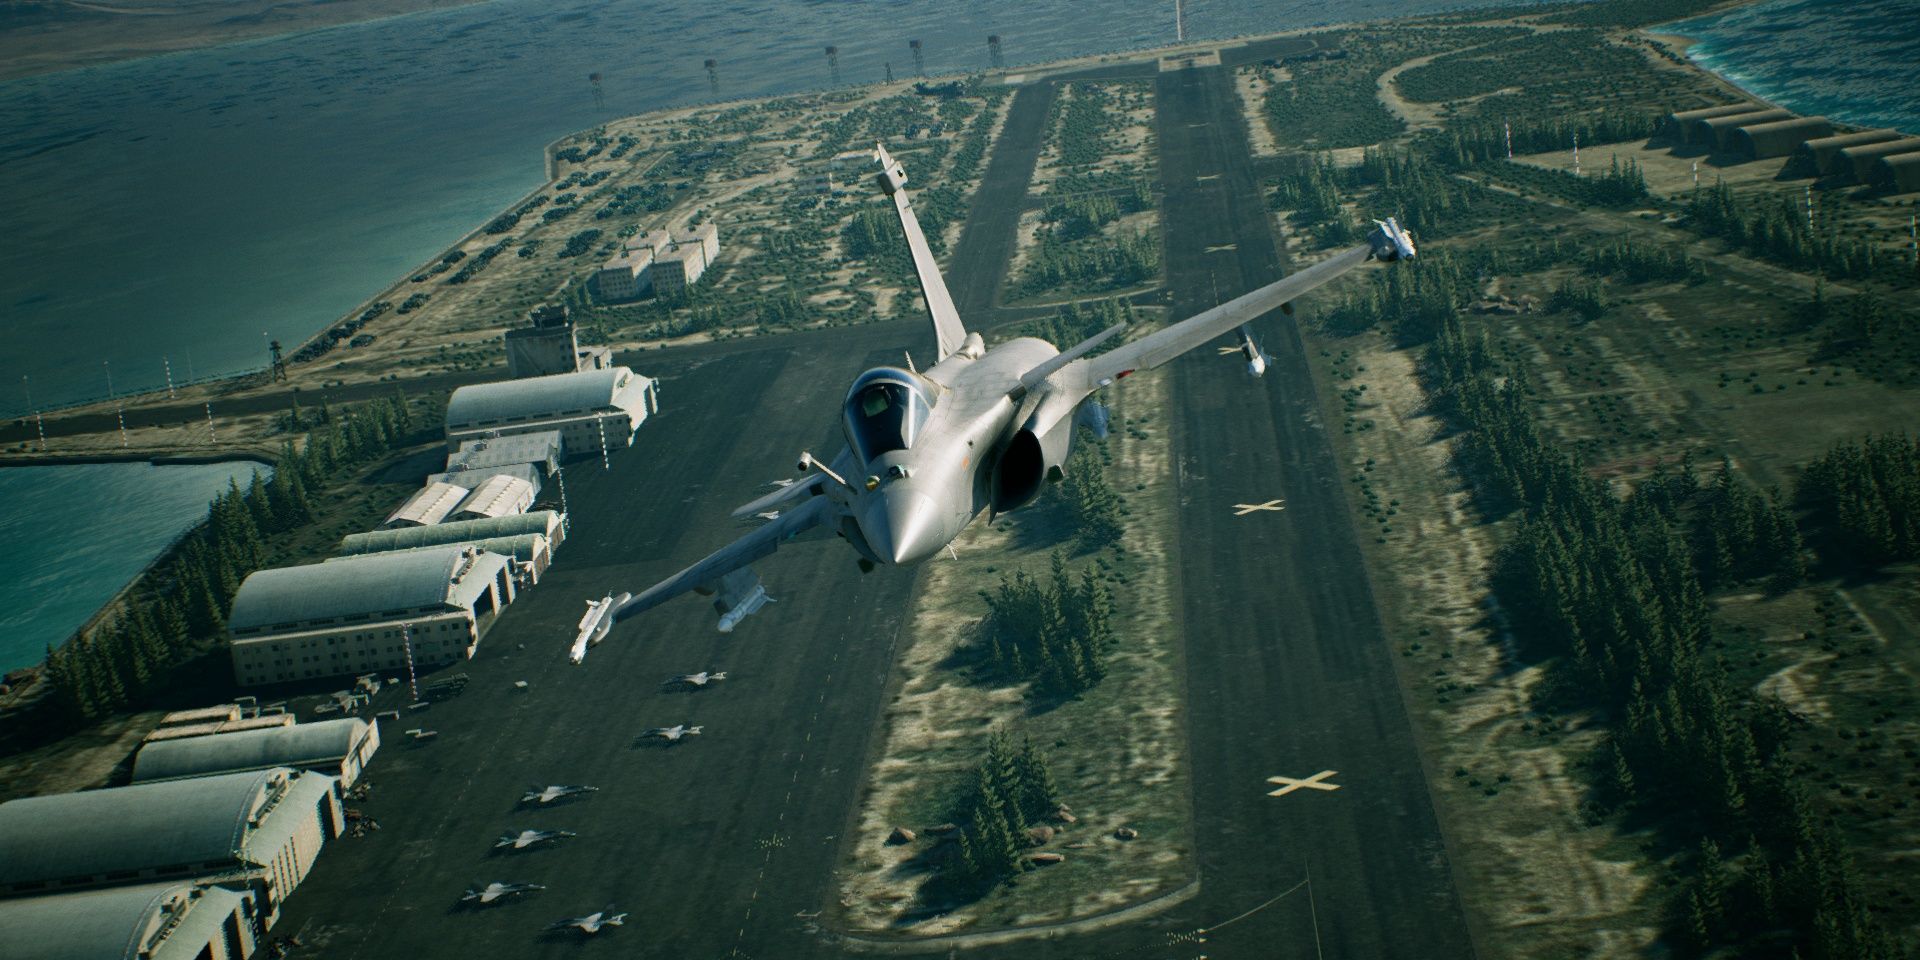 Plane taking off into the air from a hangar in the ocean in Ace Combat 7 